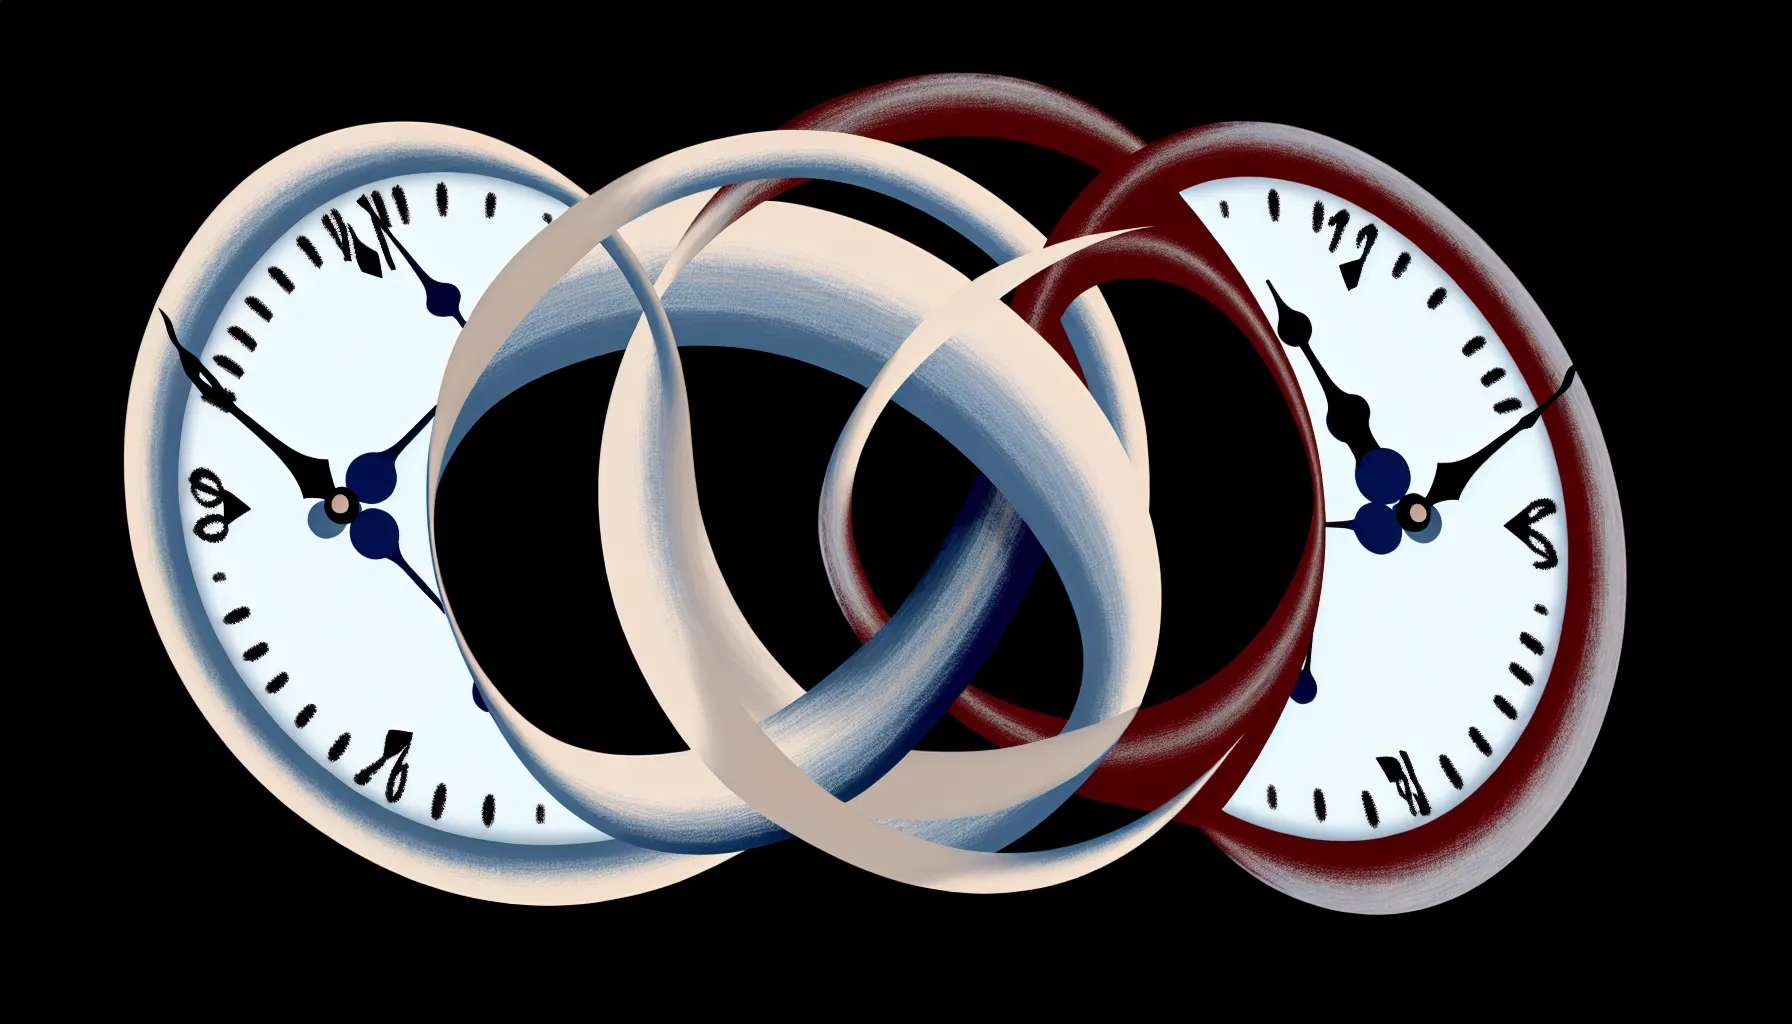 Abstract representation of time and relationships